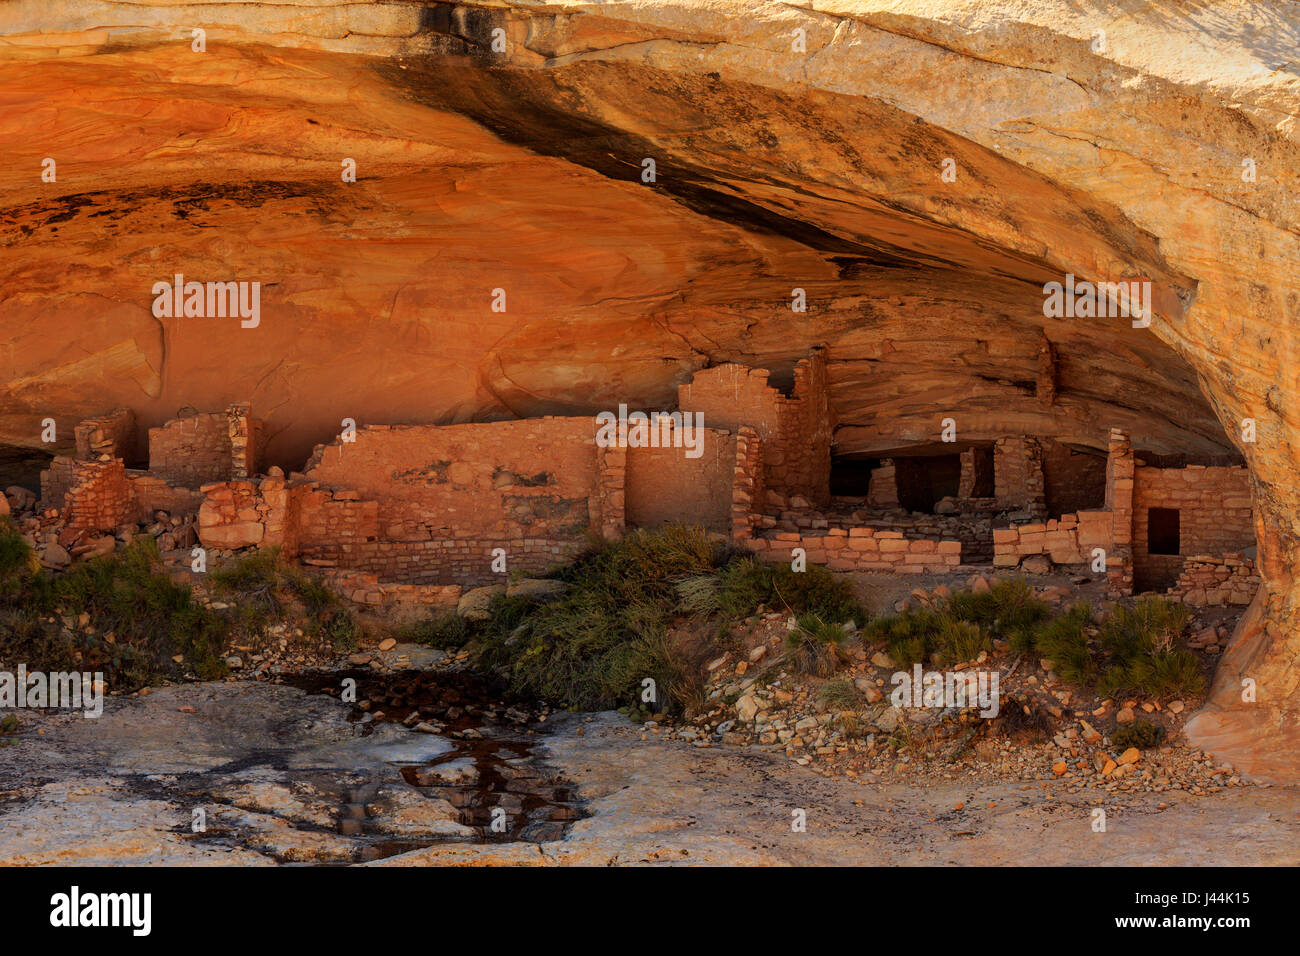 This is a view of a large cliff dwelling at the Butler Wash Ruin in Bears Ears National Monument, San Juan County, Utah, USA. Stock Photo